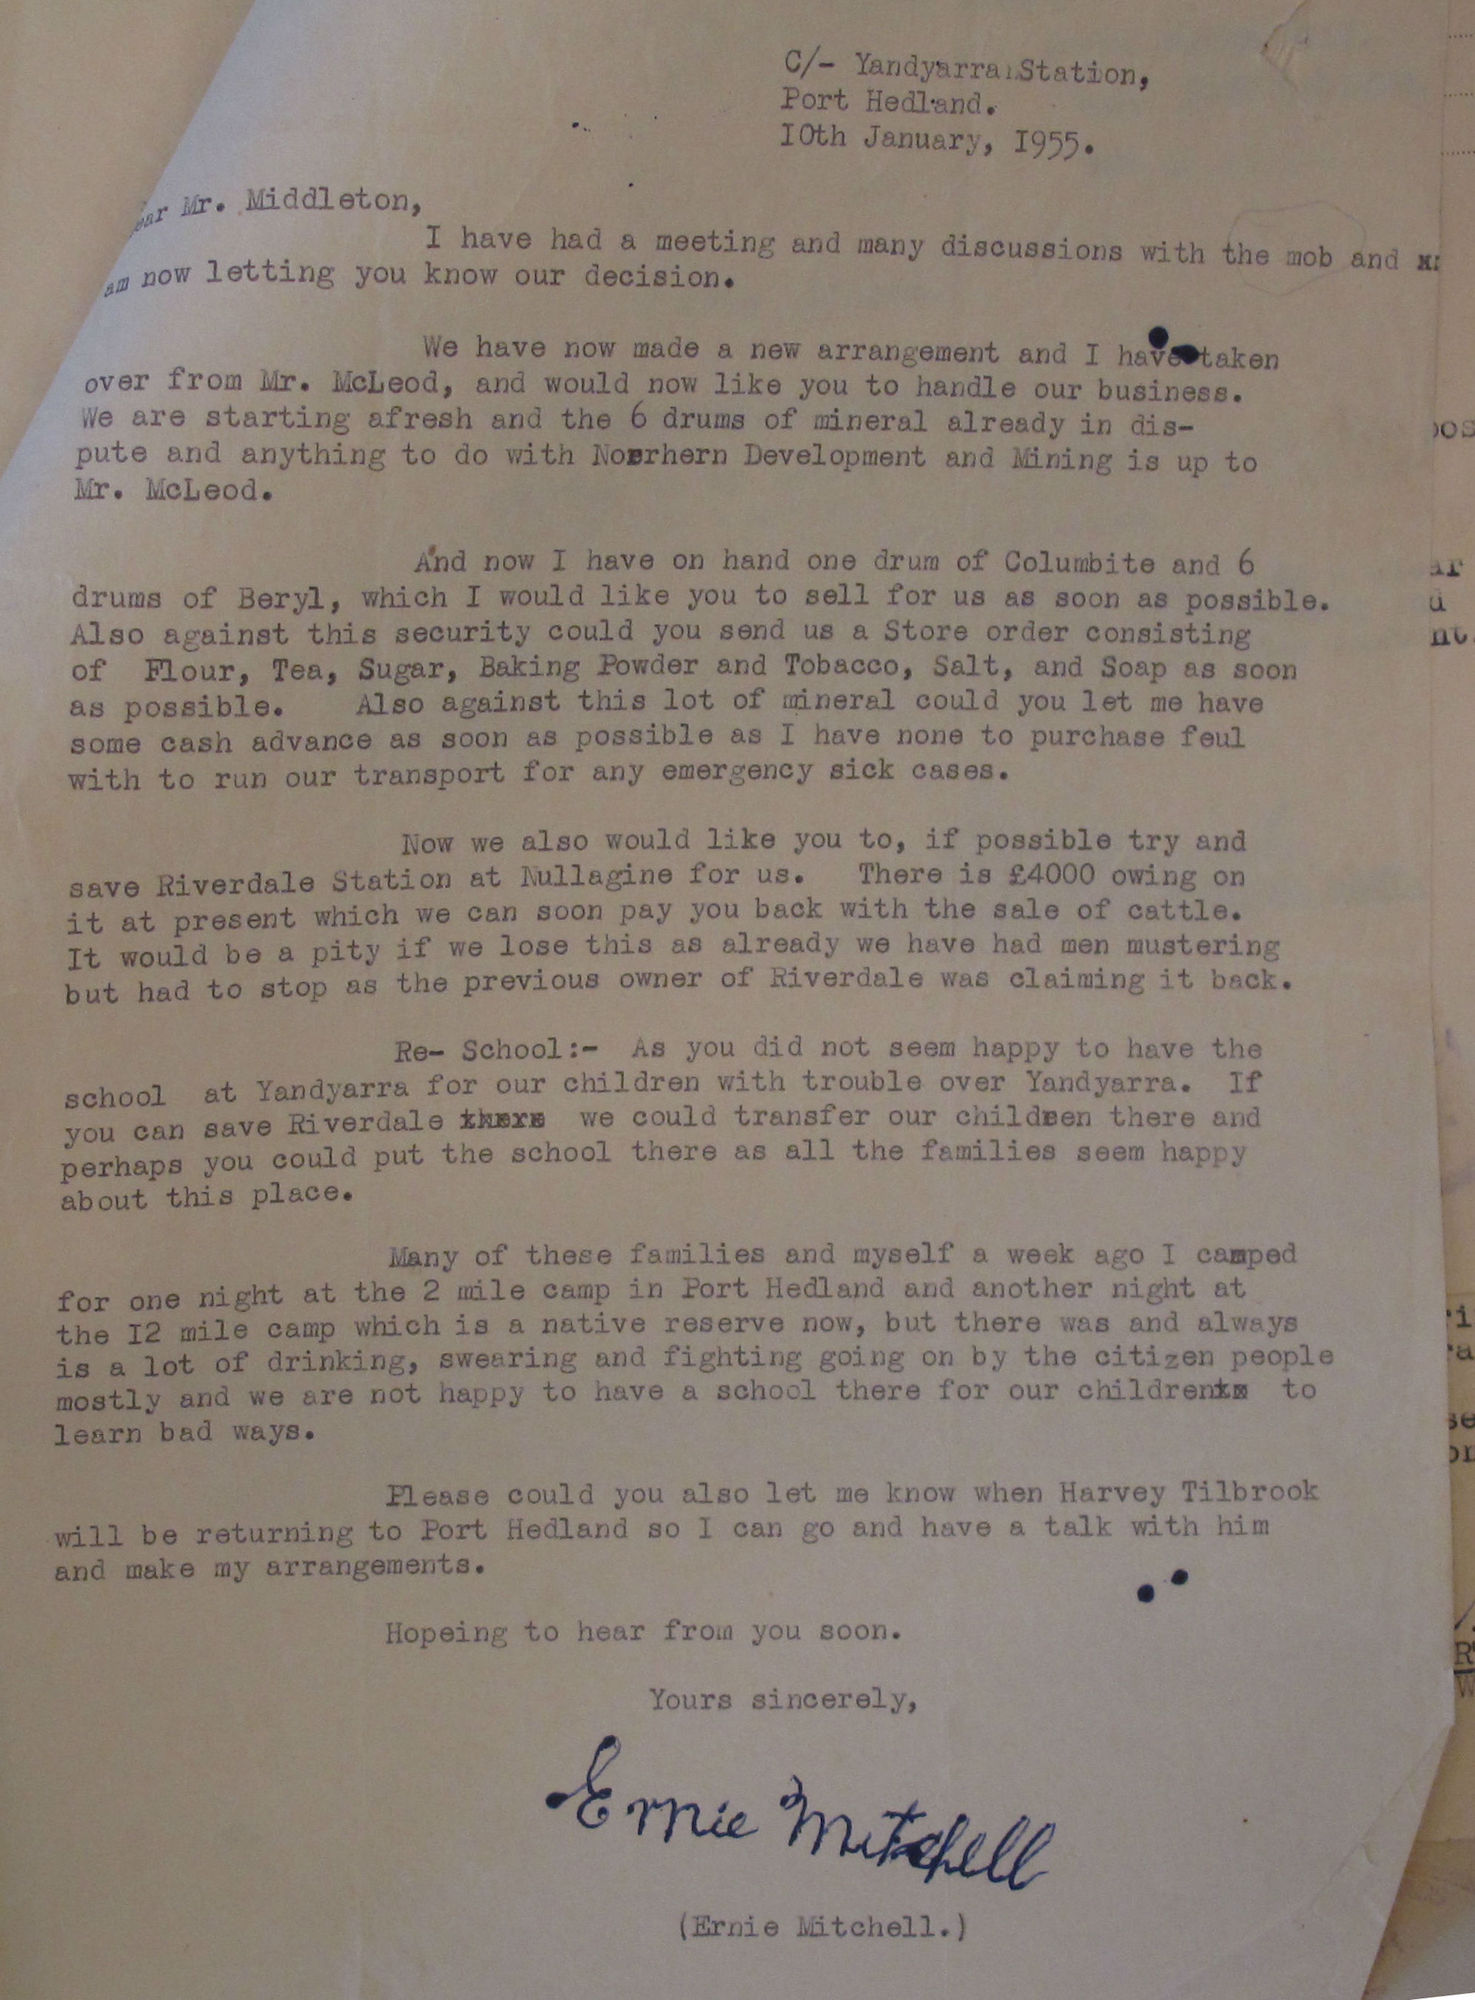 Mitchell to Middleton, 10 January 1955